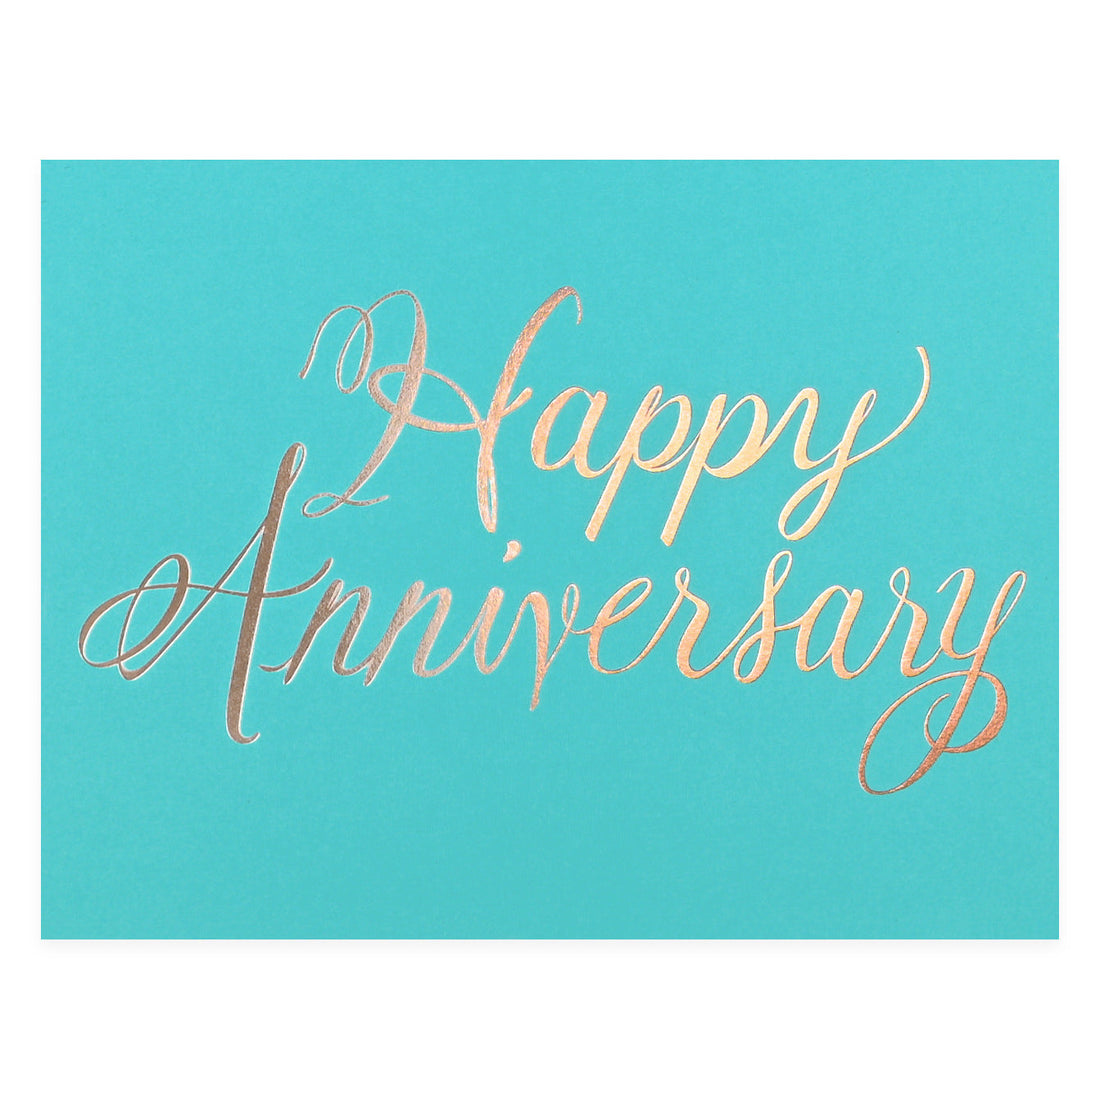 Banquet Workshop Happy Anniversary Rose Gold Greeting Card 